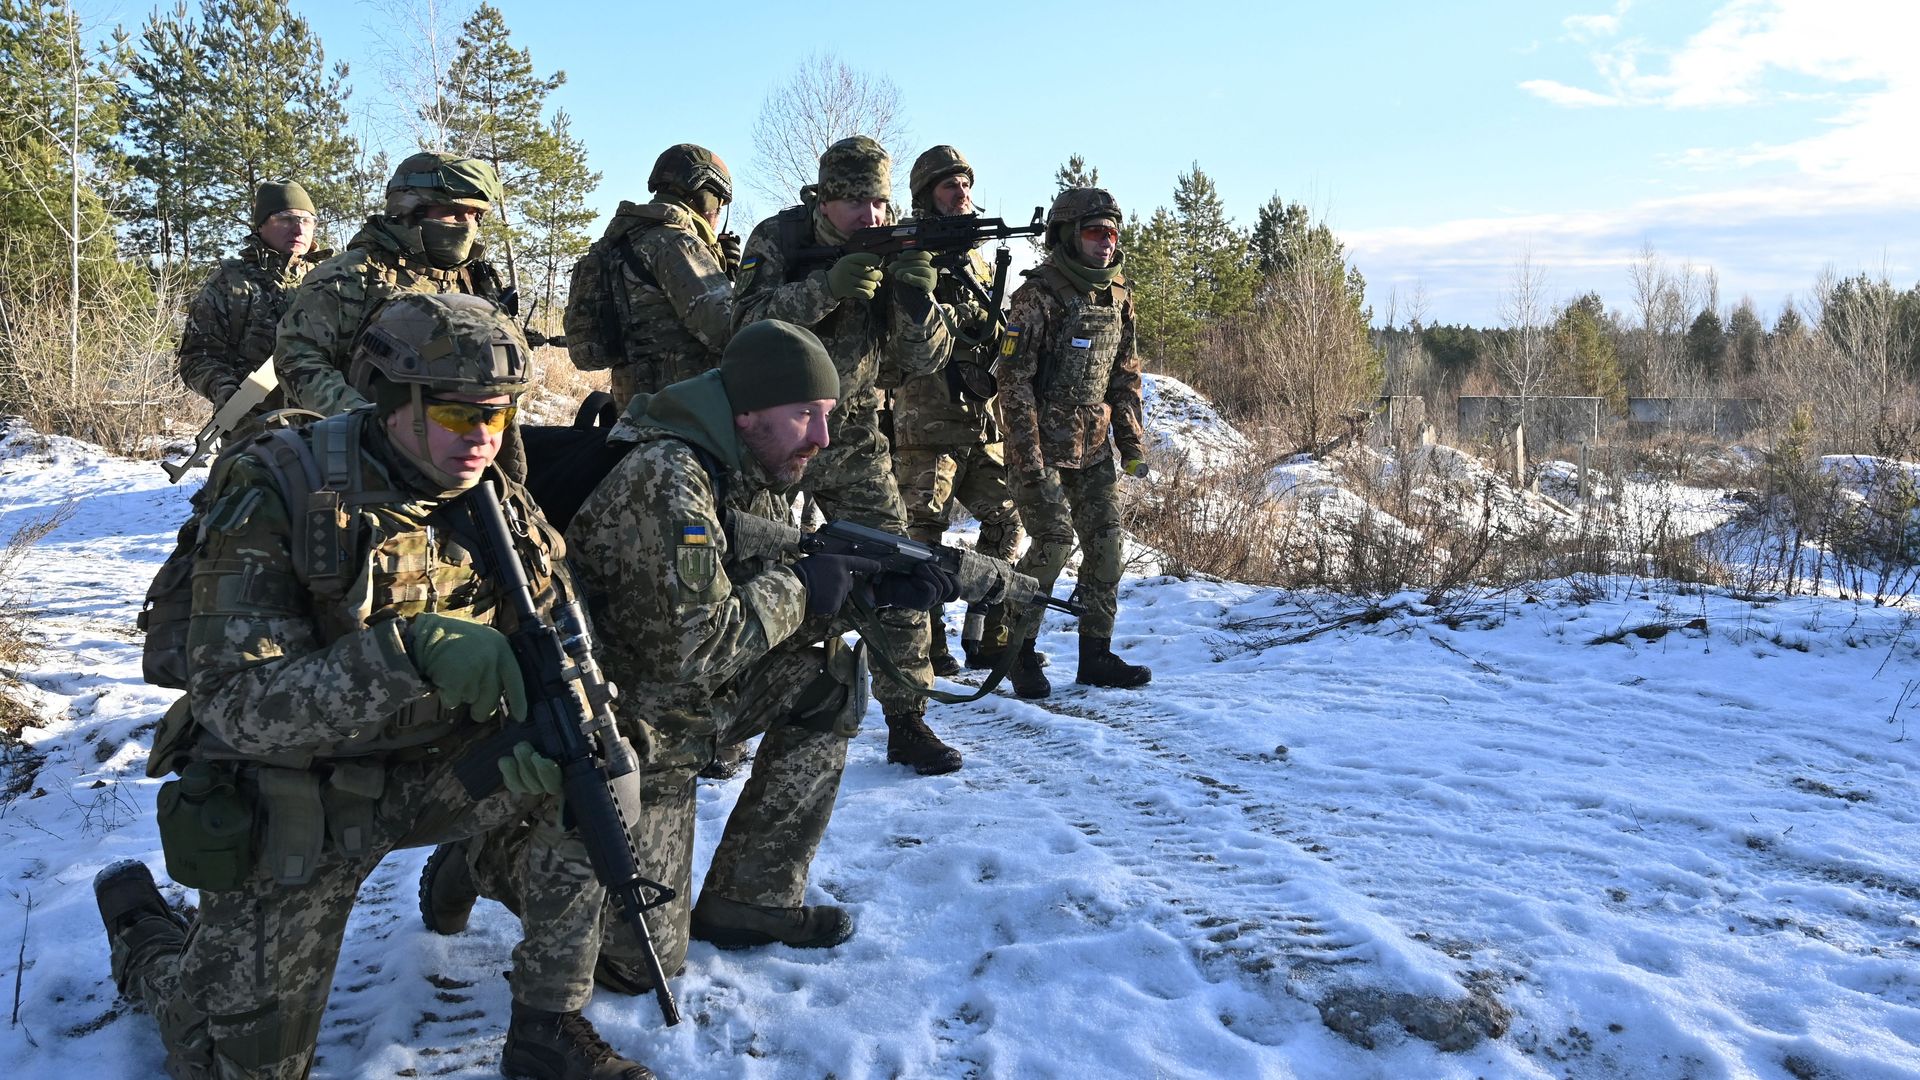 This winter's cold temperatures in Ukraine favor Zelenskyy's forces and pose challenges for Russia's military operations.